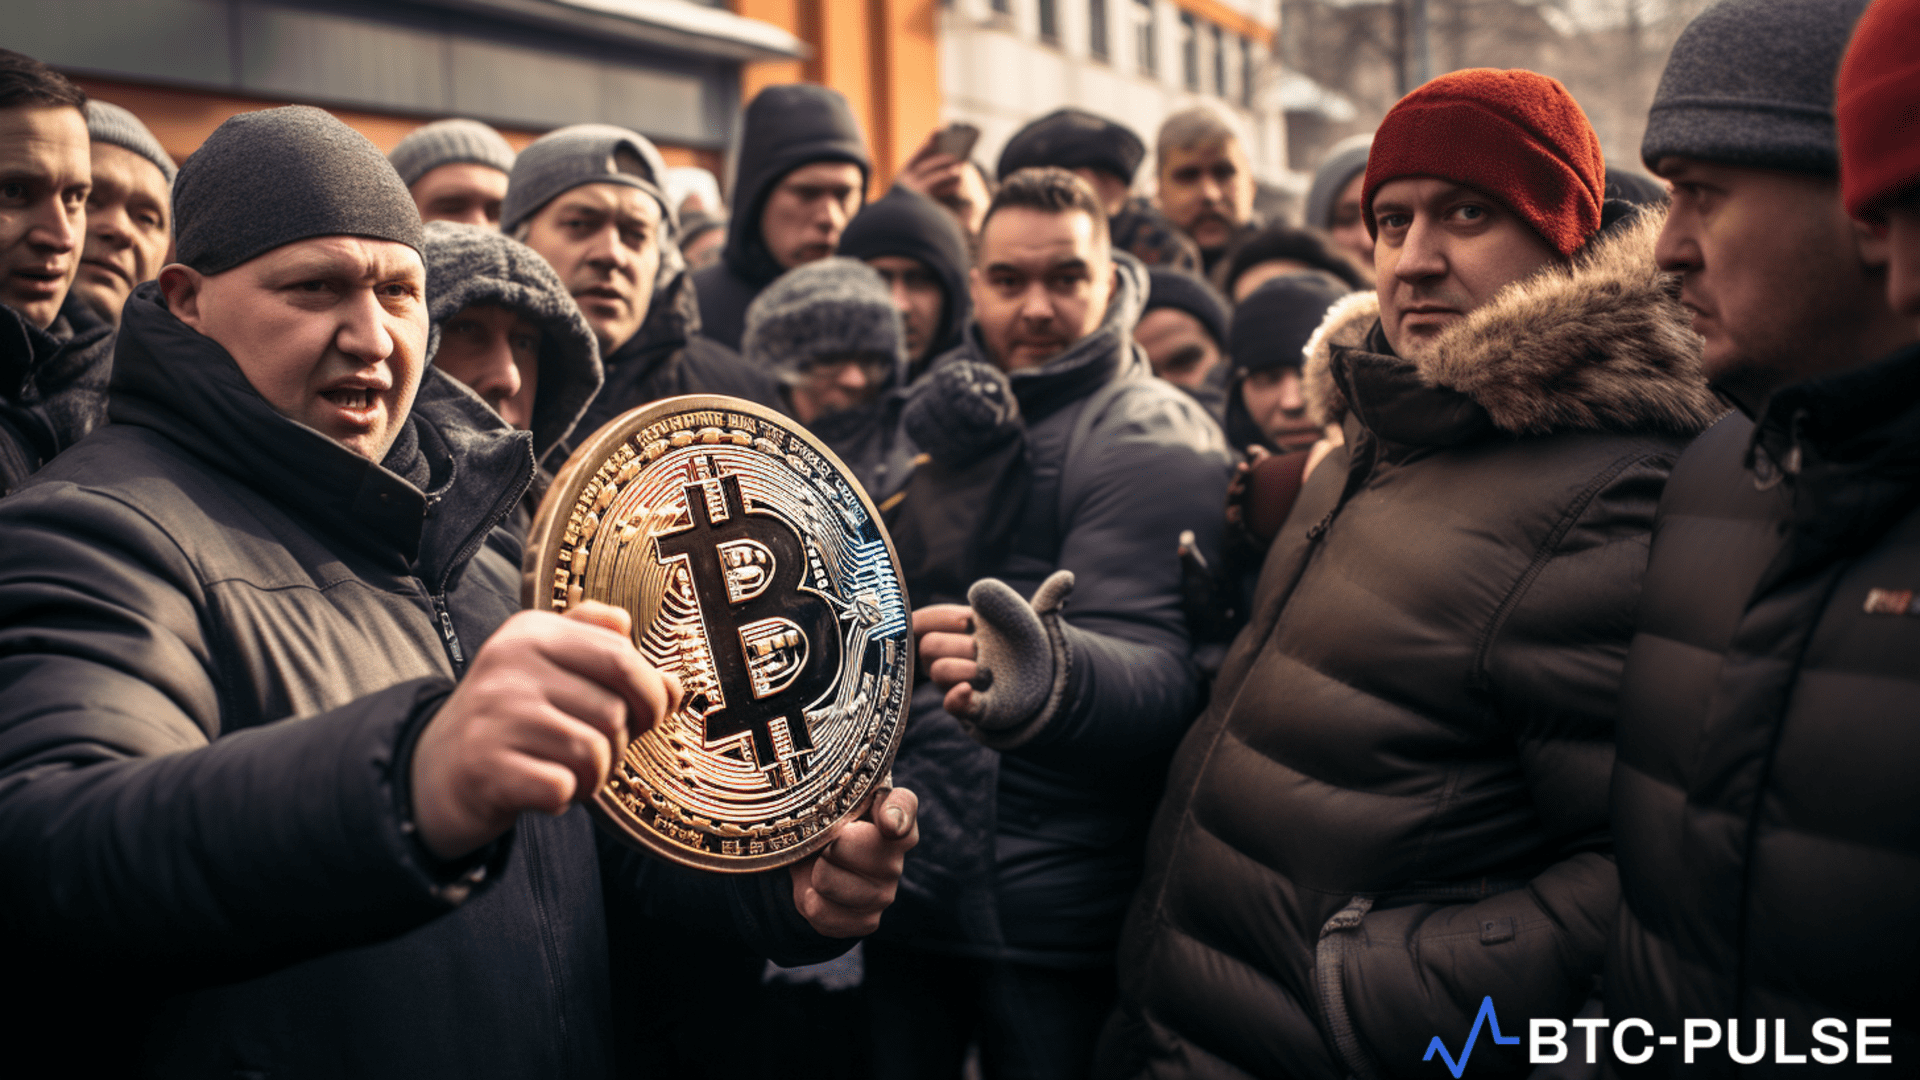 Turmoil at Beribit: Clients Protest as Russian Crypto Exchange Faces Possible Ban